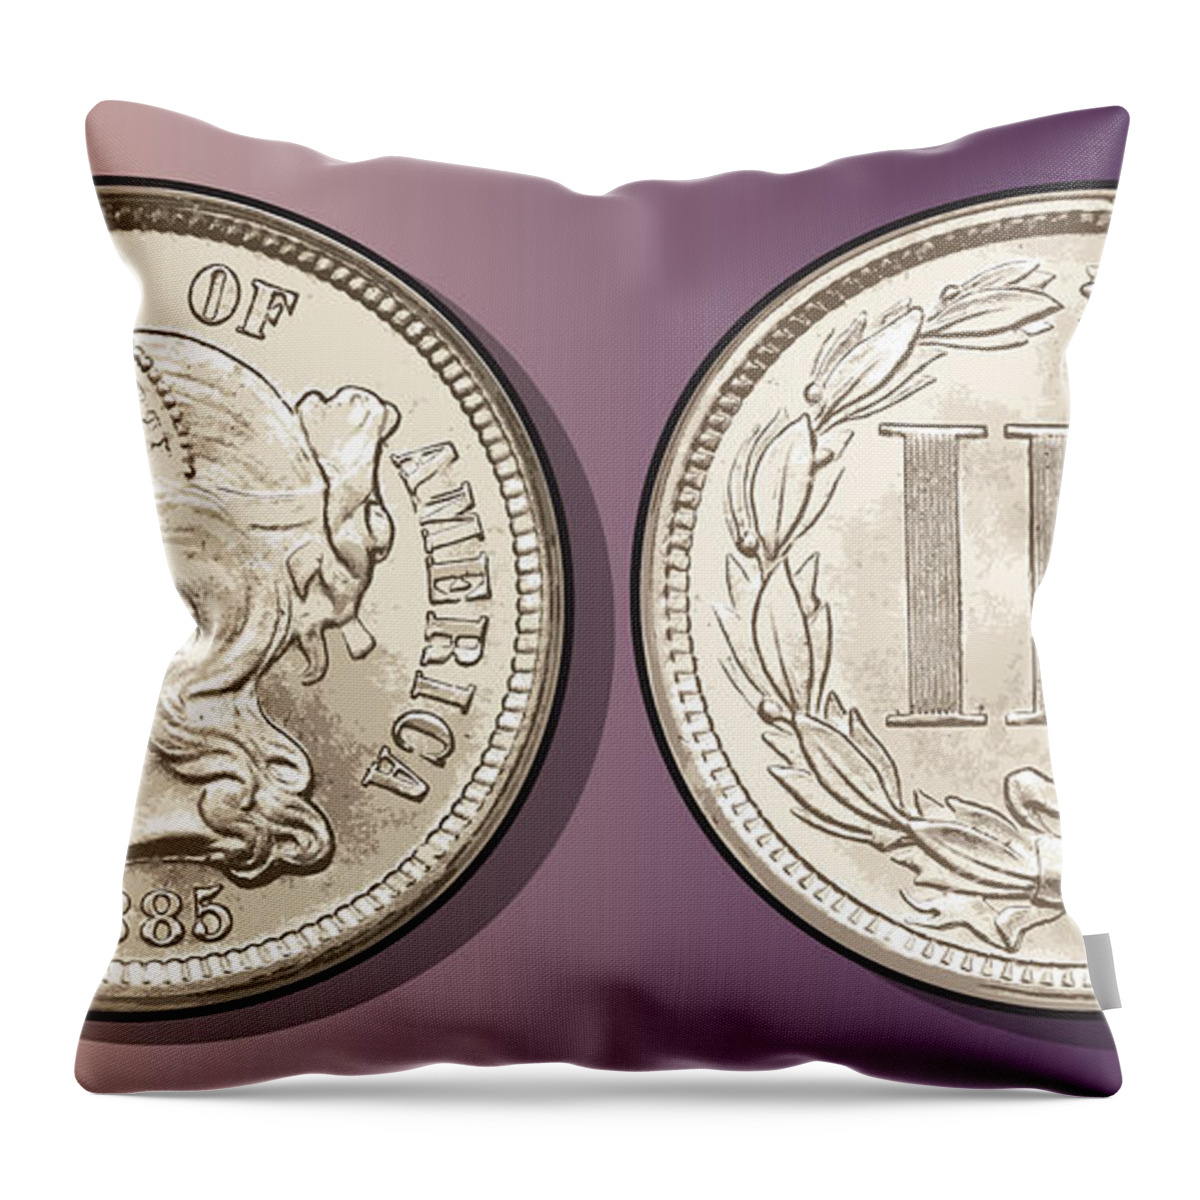 3 Cent Nickel Throw Pillow featuring the drawing 3 Cent Nickel by Greg Joens